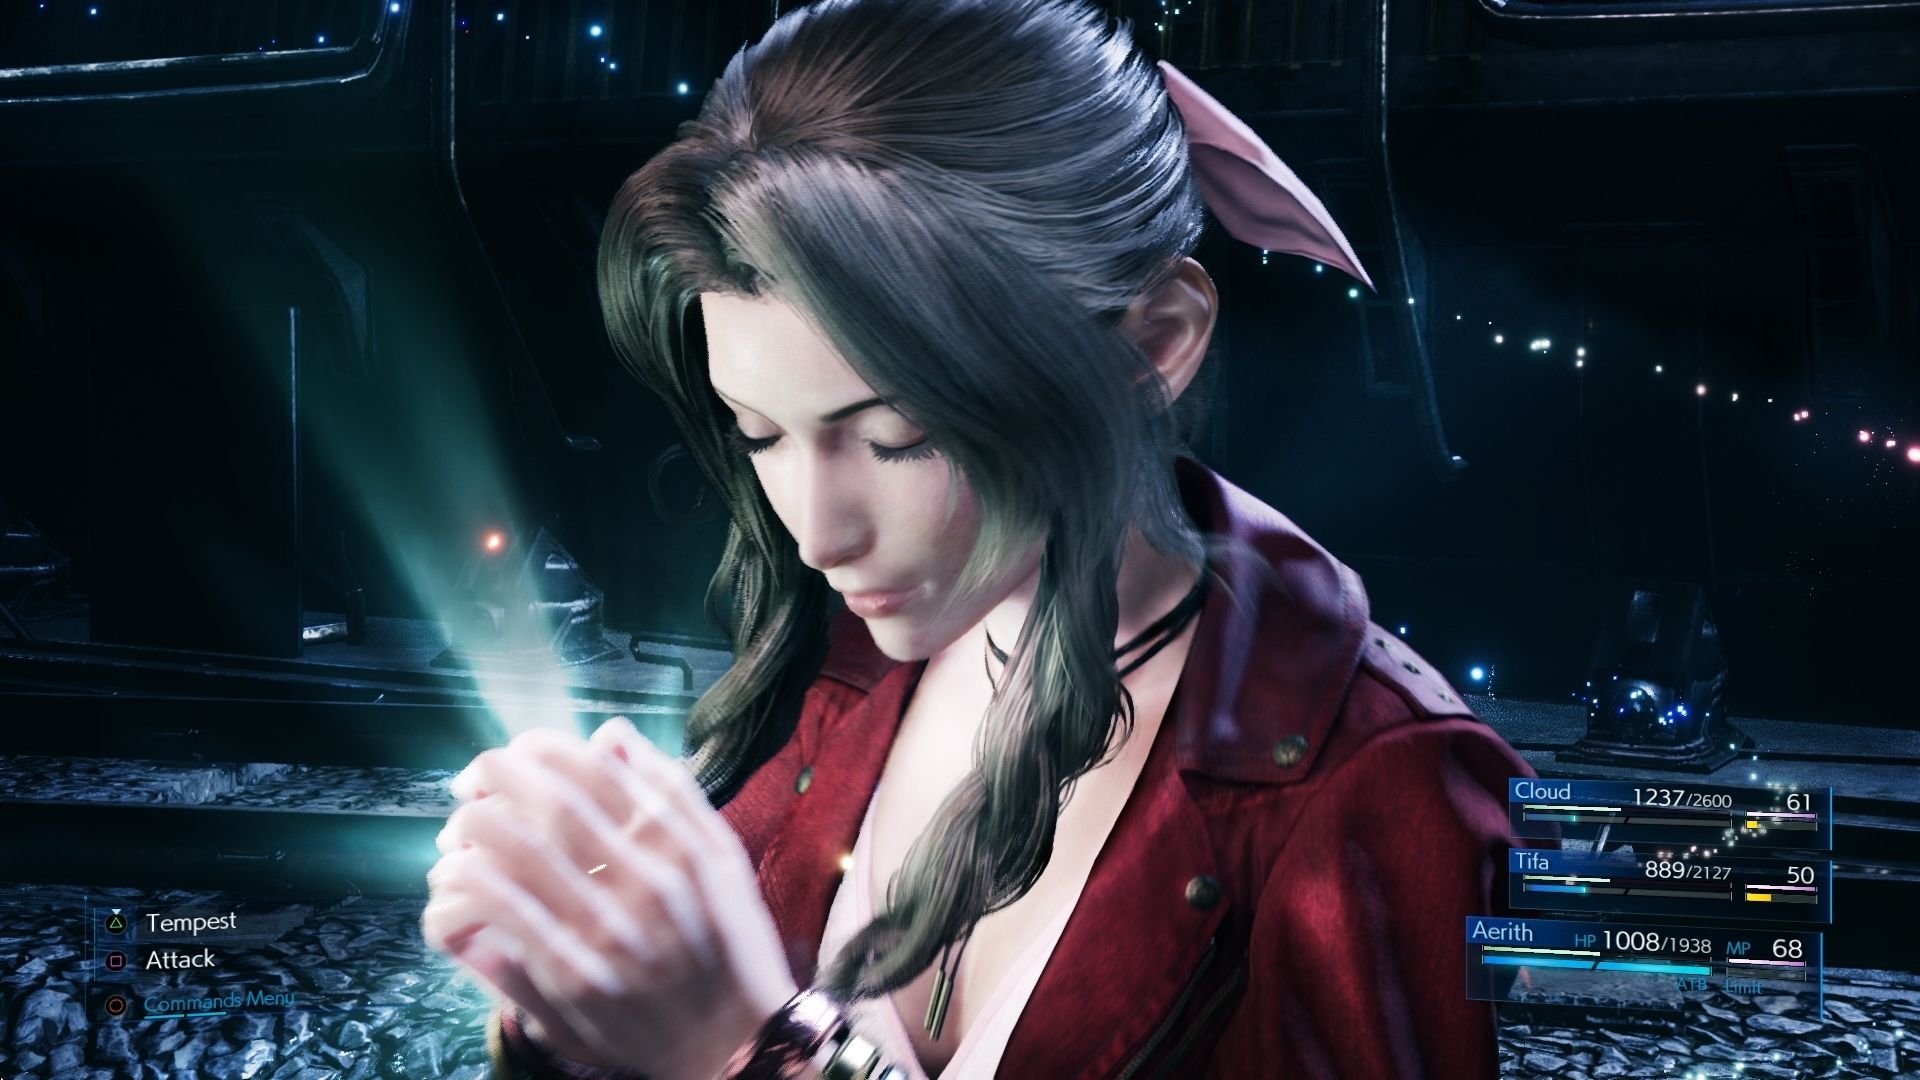 Awesome Final Fantasy 7 Remake Gameplay Shows Tifa, Aerith, Ifrit